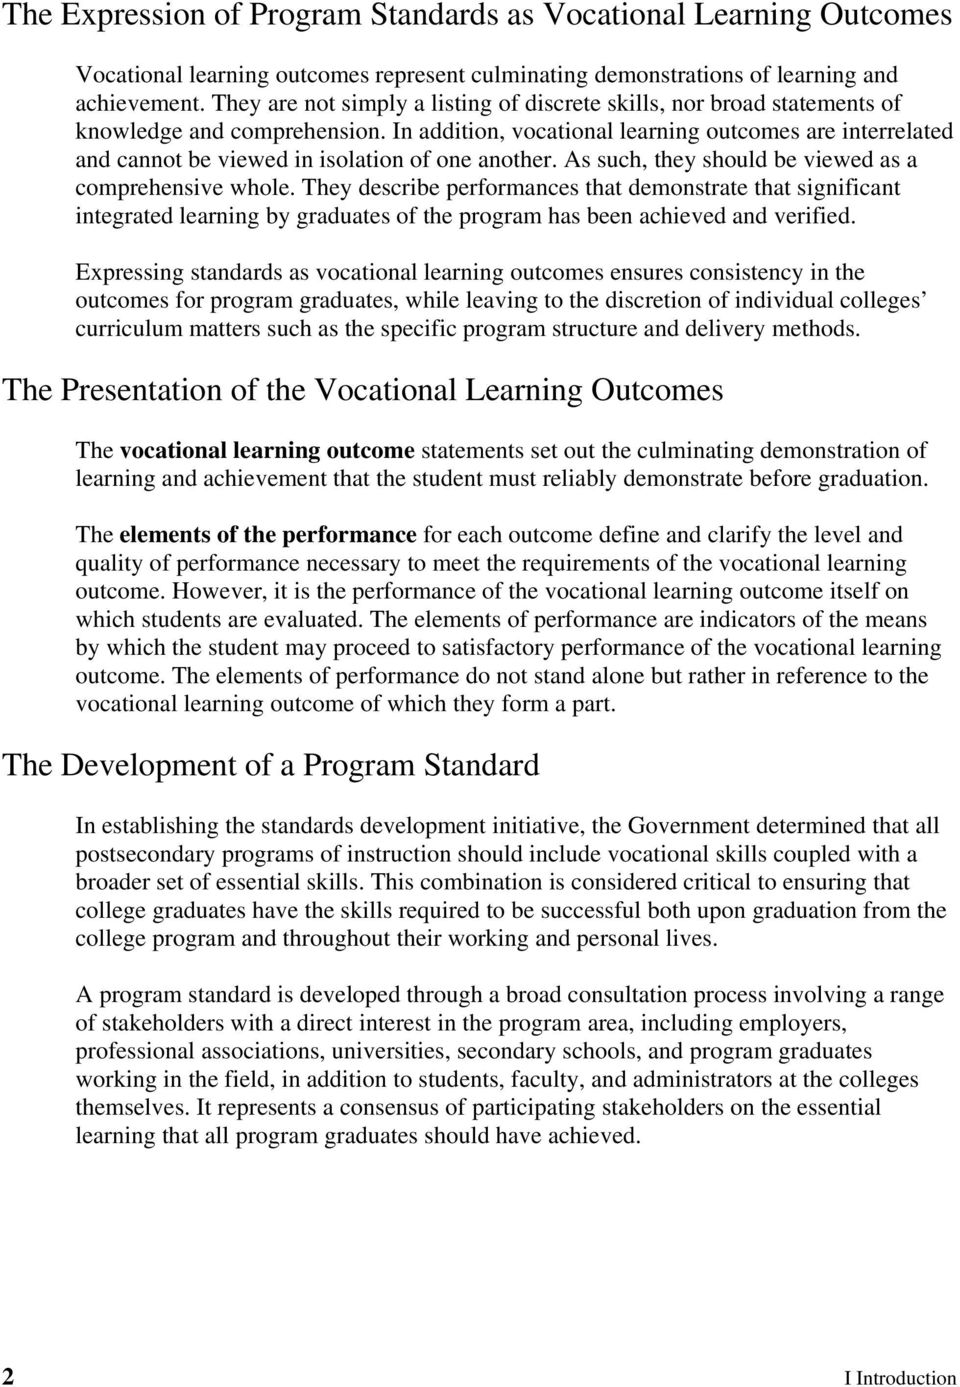 In addition, vocational learning outcomes are interrelated and cannot be viewed in isolation of one another. As such, they should be viewed as a comprehensive whole.